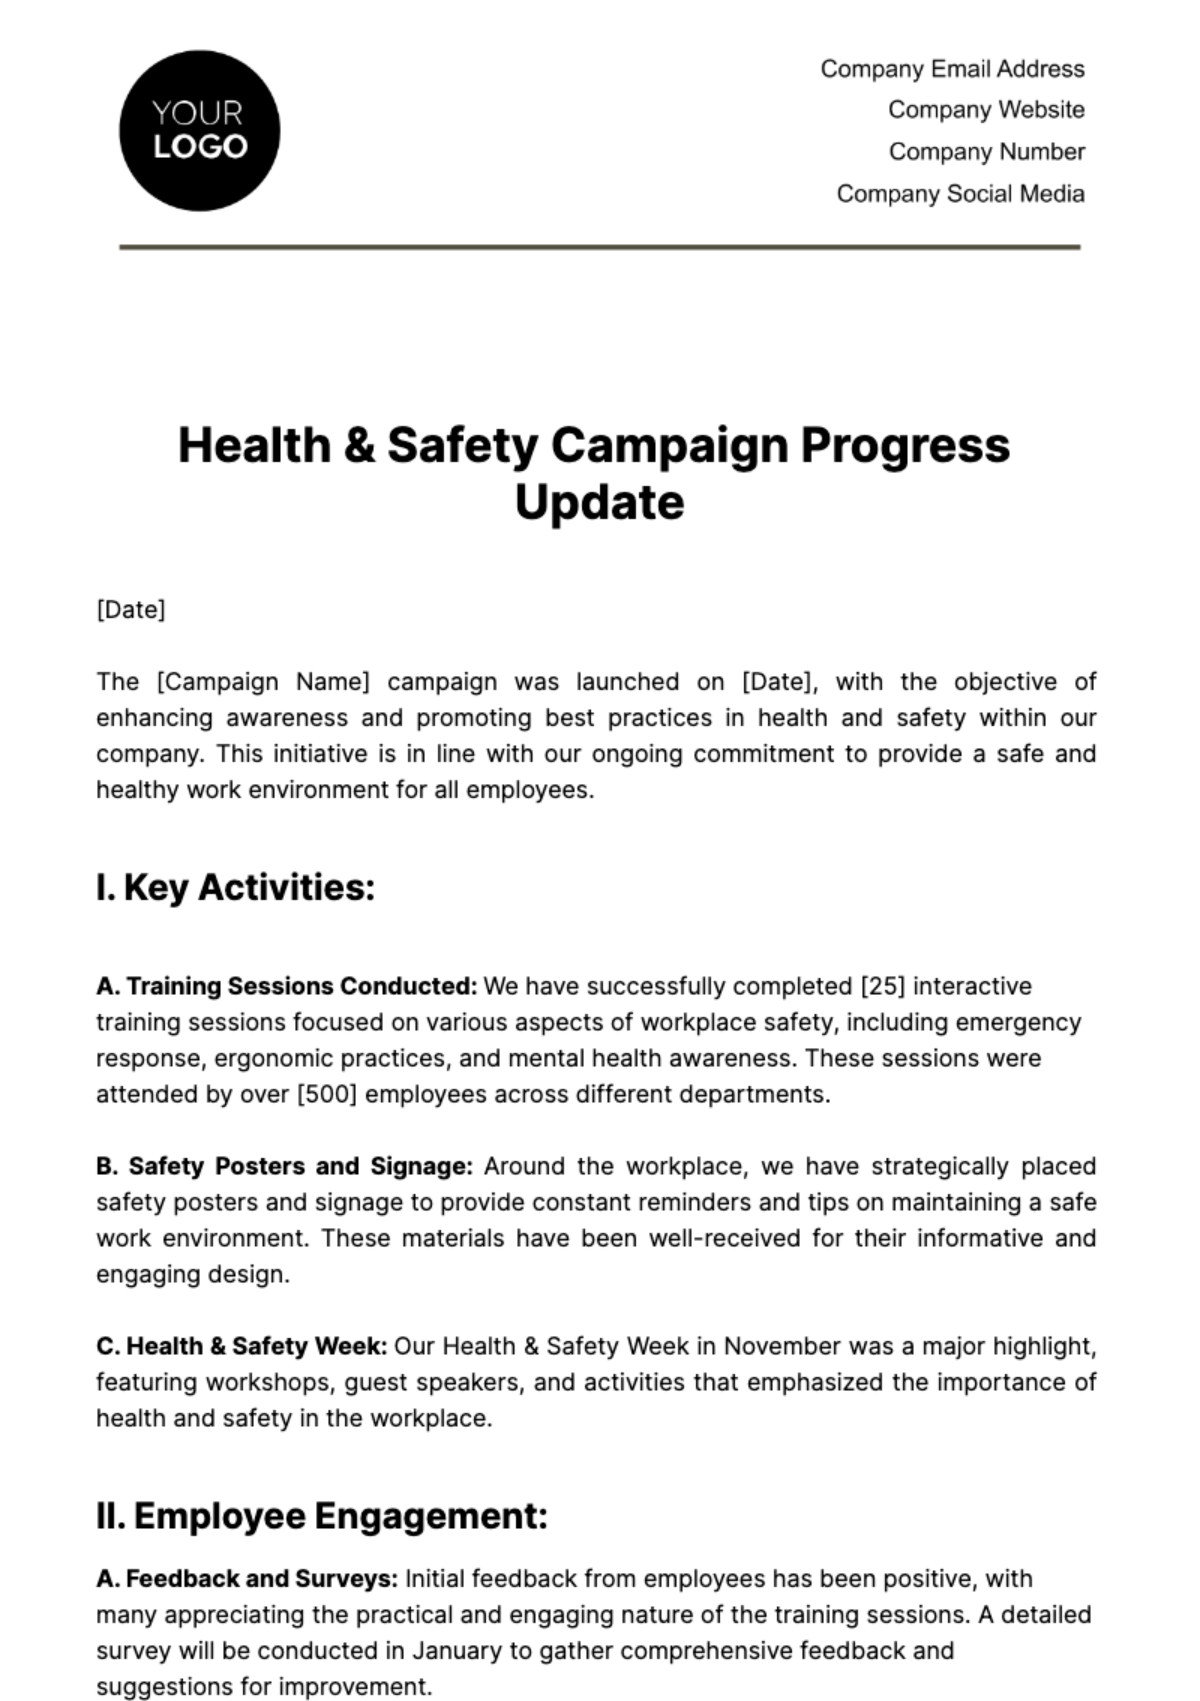 Free Health & Safety Campaign Progress Update Template